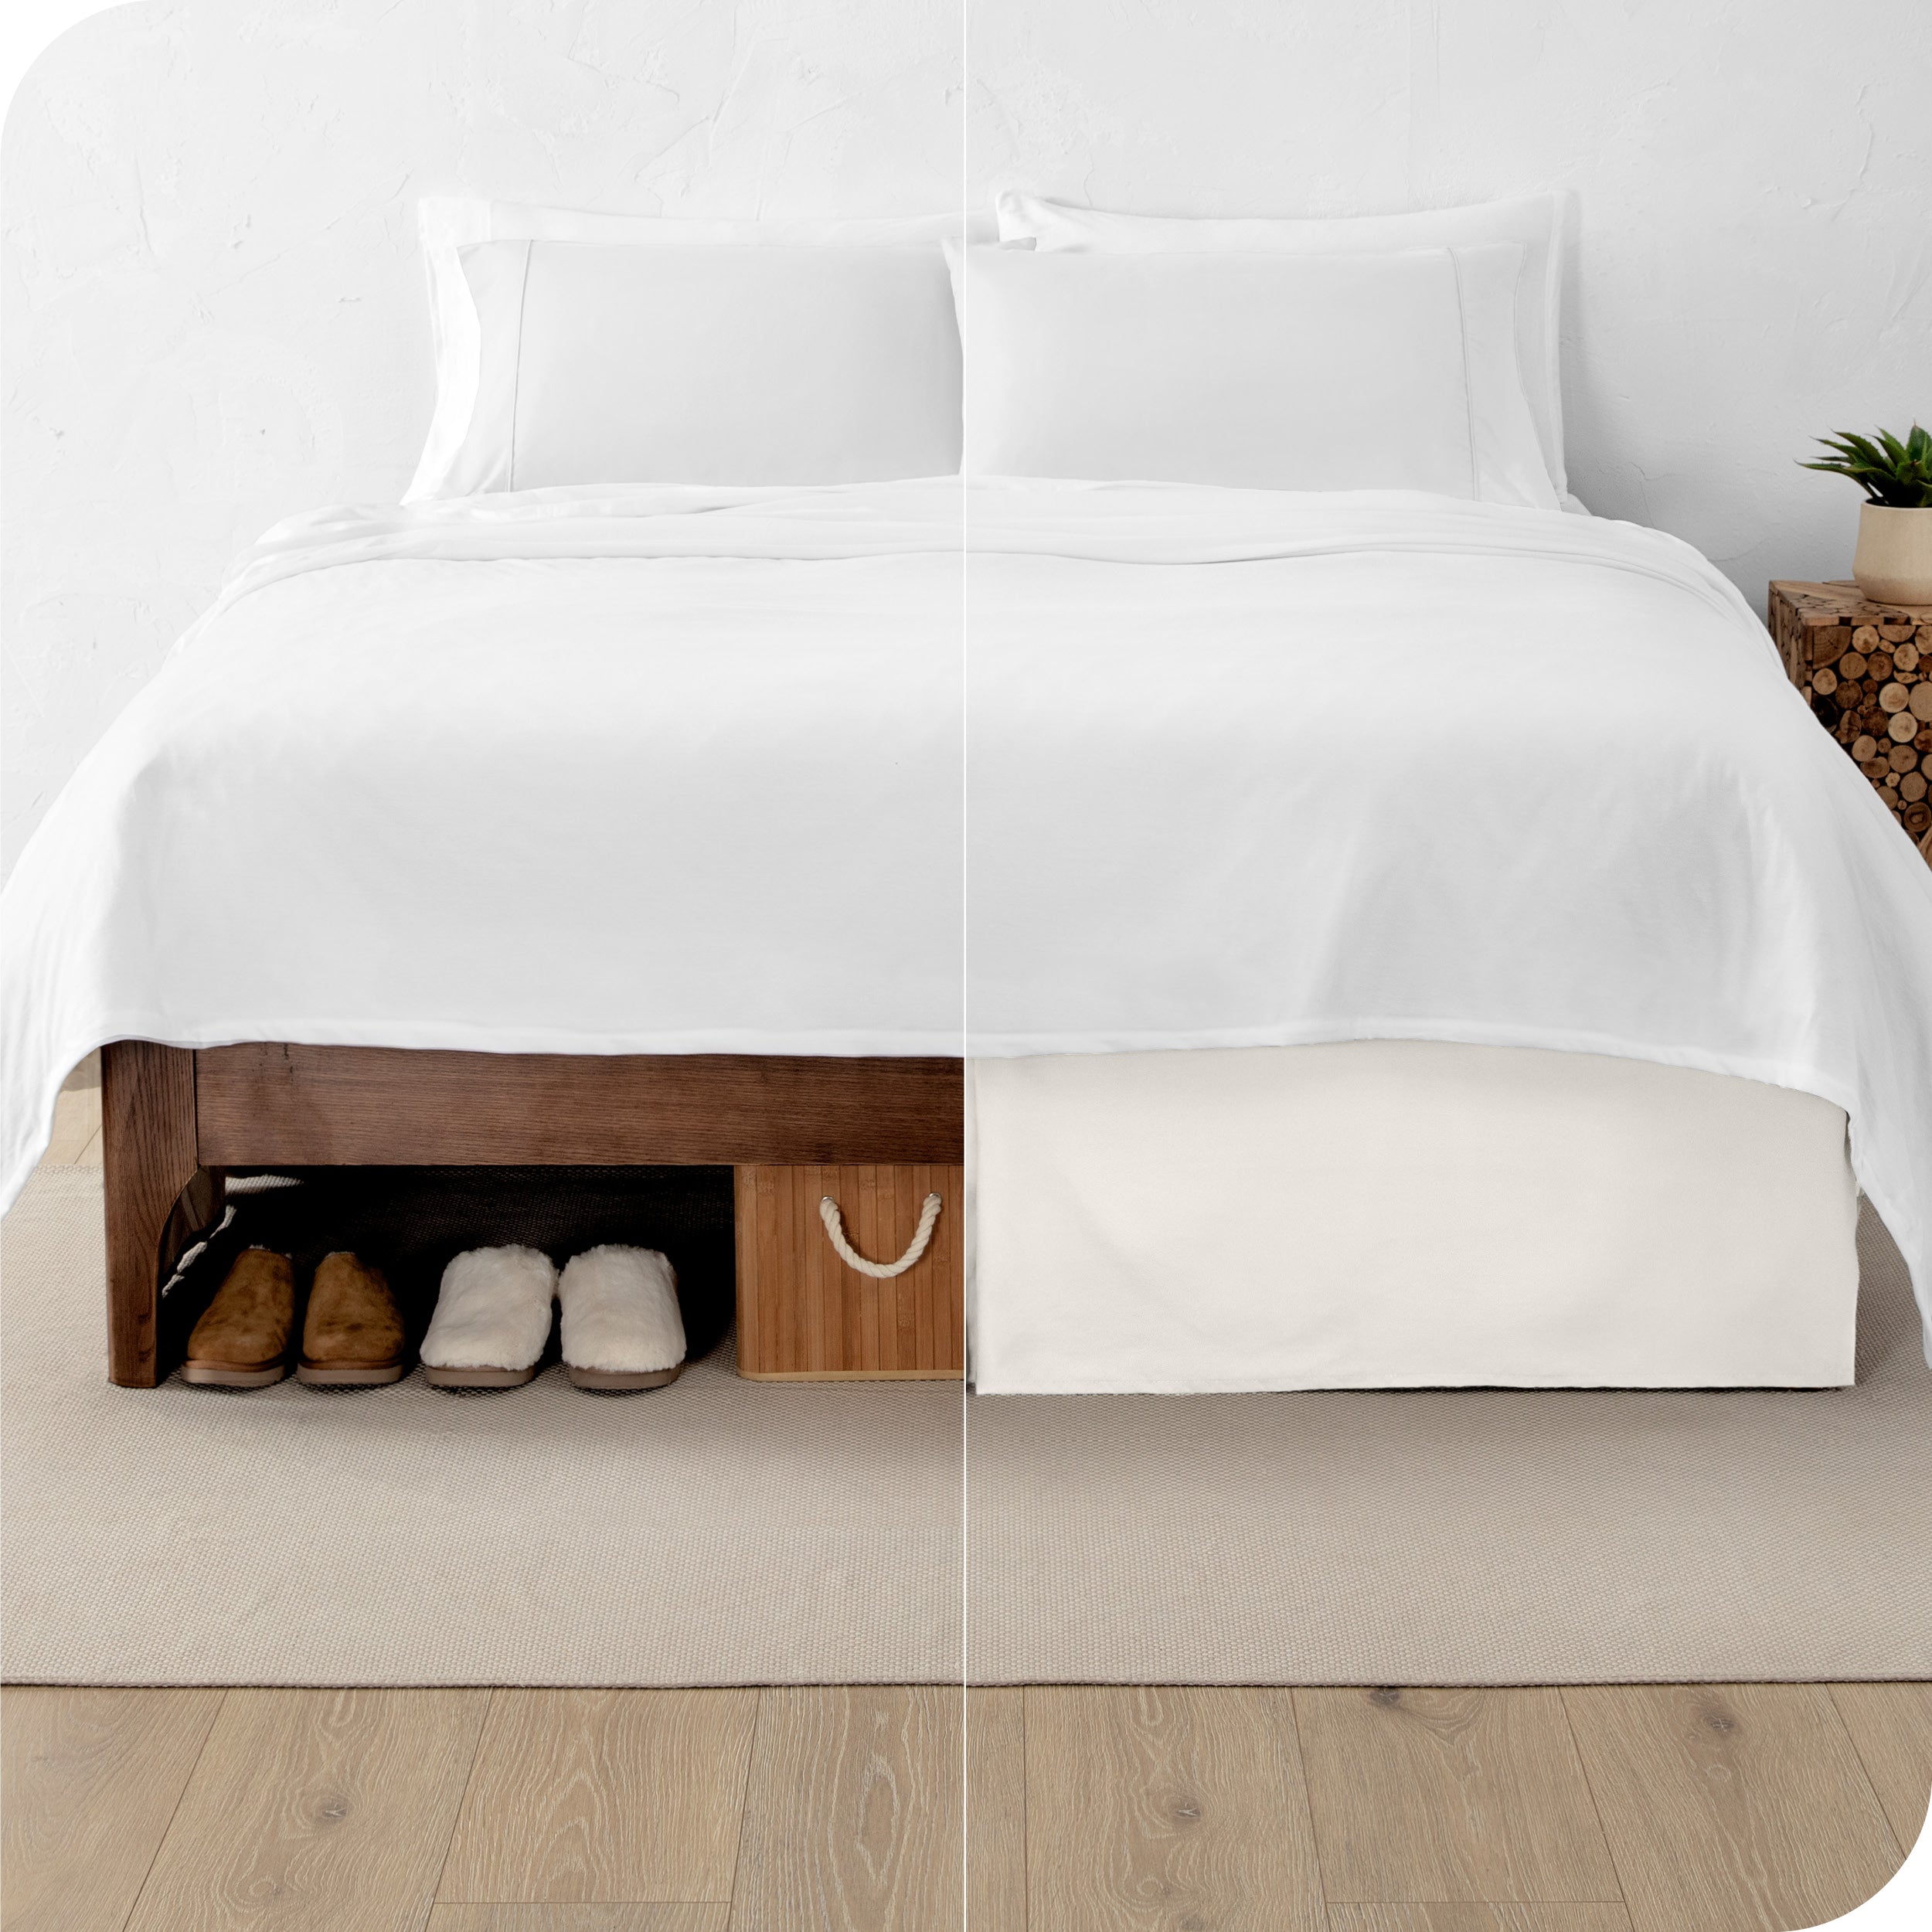 A split image showing a bed without a bed skirt on the left and with a bed skirt on the right.